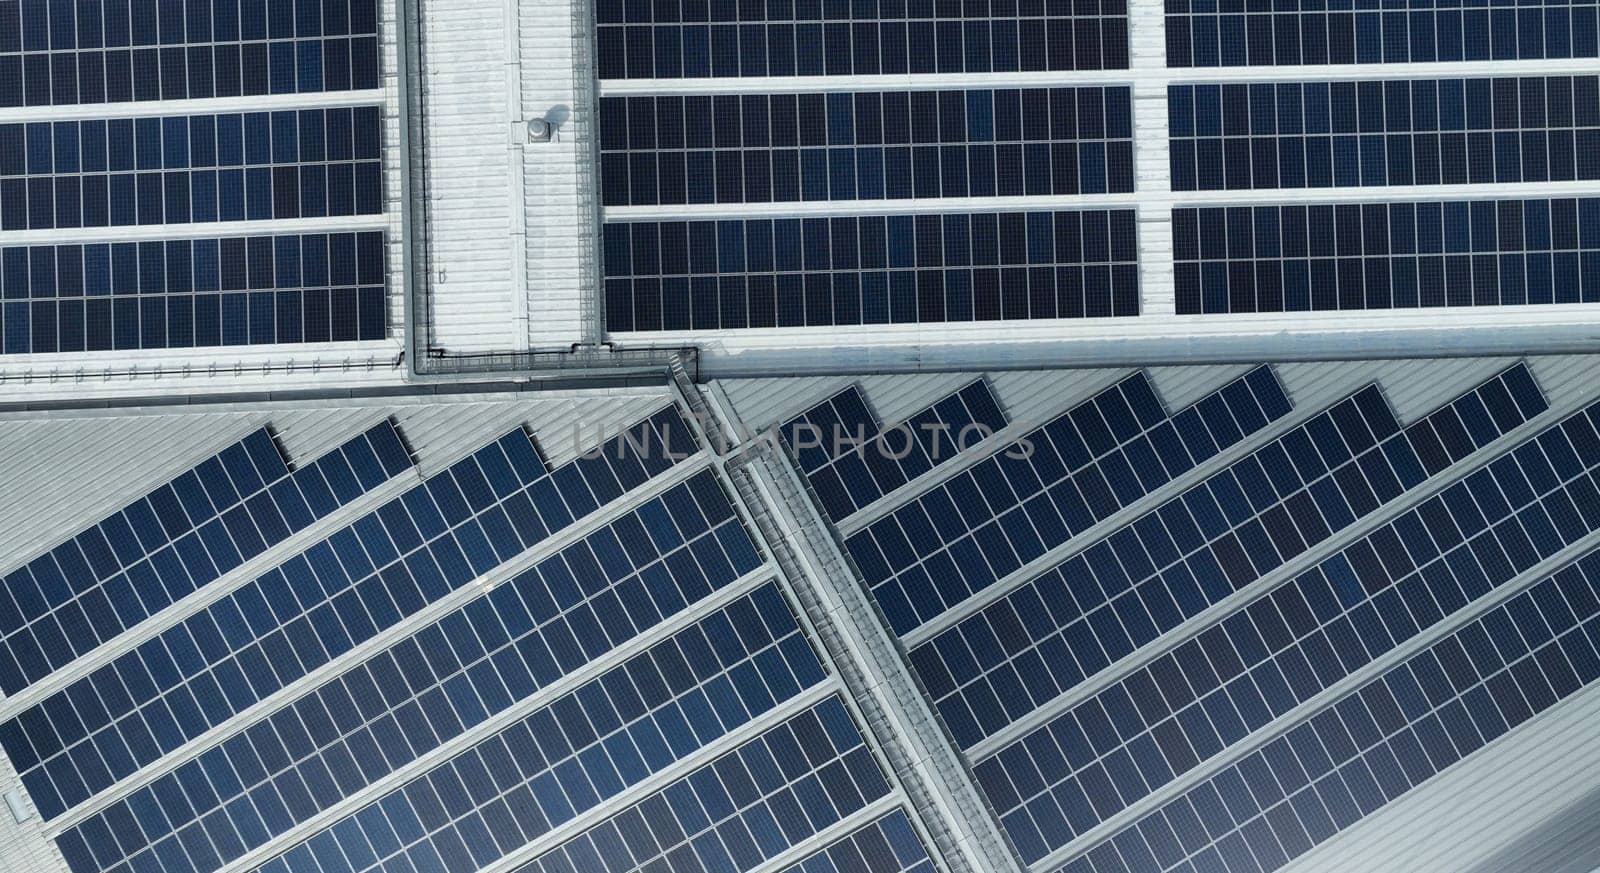 Aerial view of solar panels or photovoltaic module. Solar power for green energy. Sustainable resources. Solar cell panels use sun light as a source to generate electricity. Photovoltaics or PV.